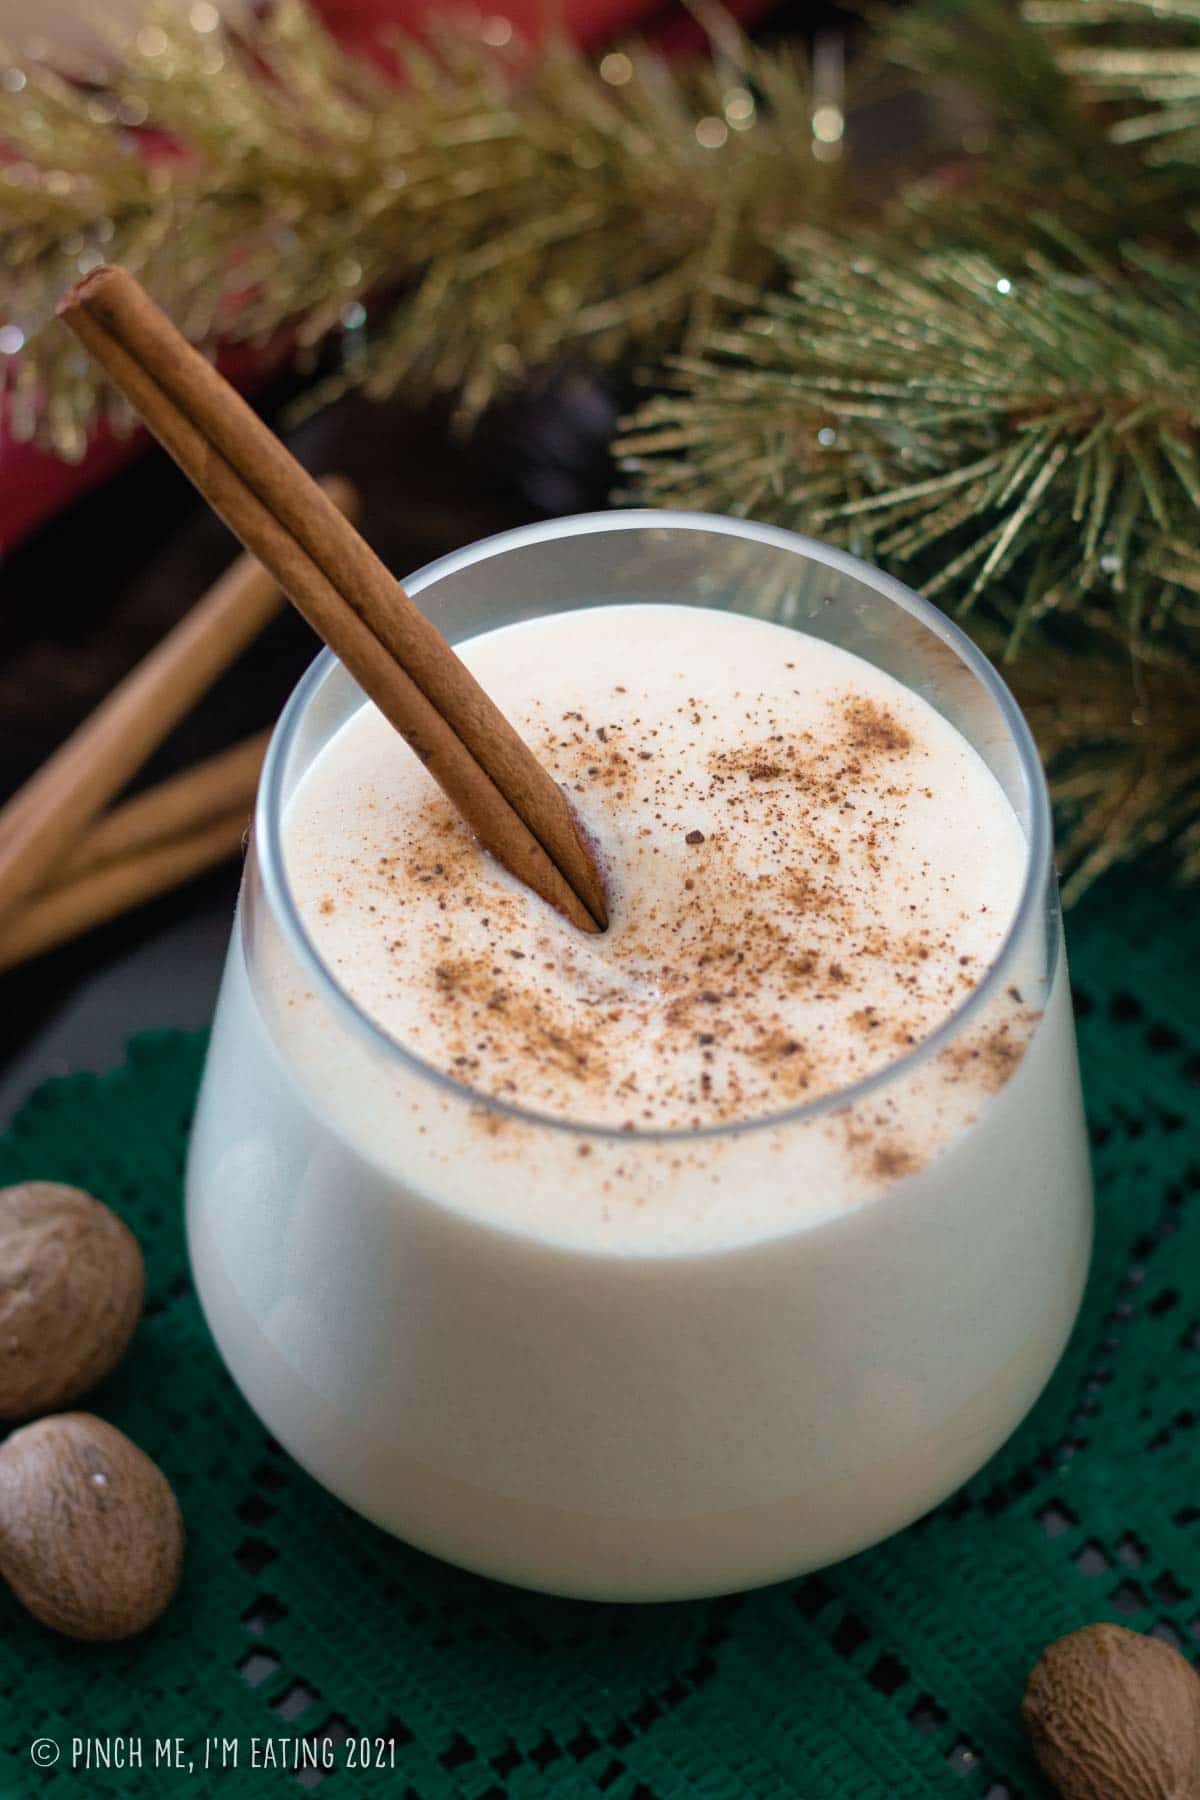 Glass of homemade eggnog with cinnamon stick, topped with ground nutmeg. Whole nutmeg is in the foreground and evergreen branch is in the background.